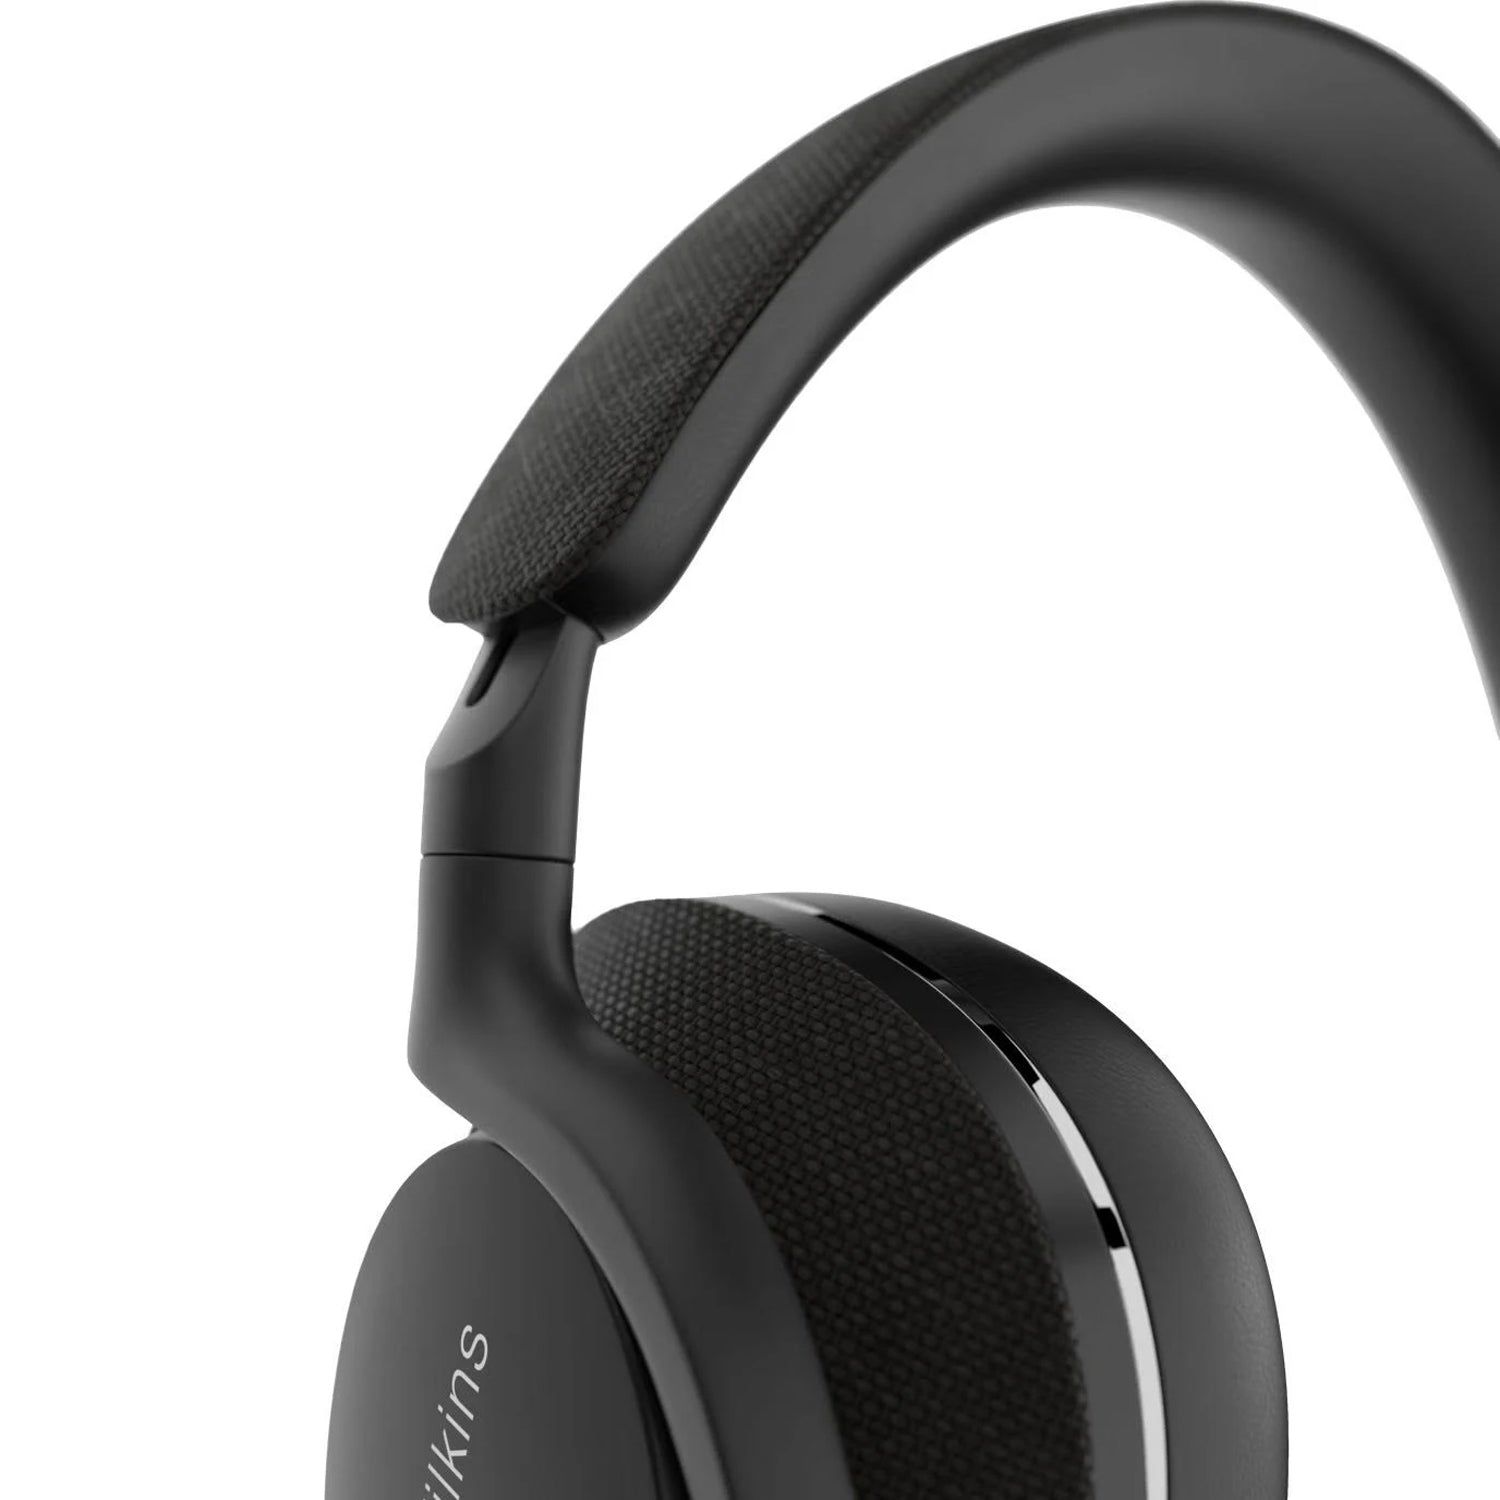 Bowers & Wilkins Px7 S2e Over-Ear Noise-Cancelling Headphones